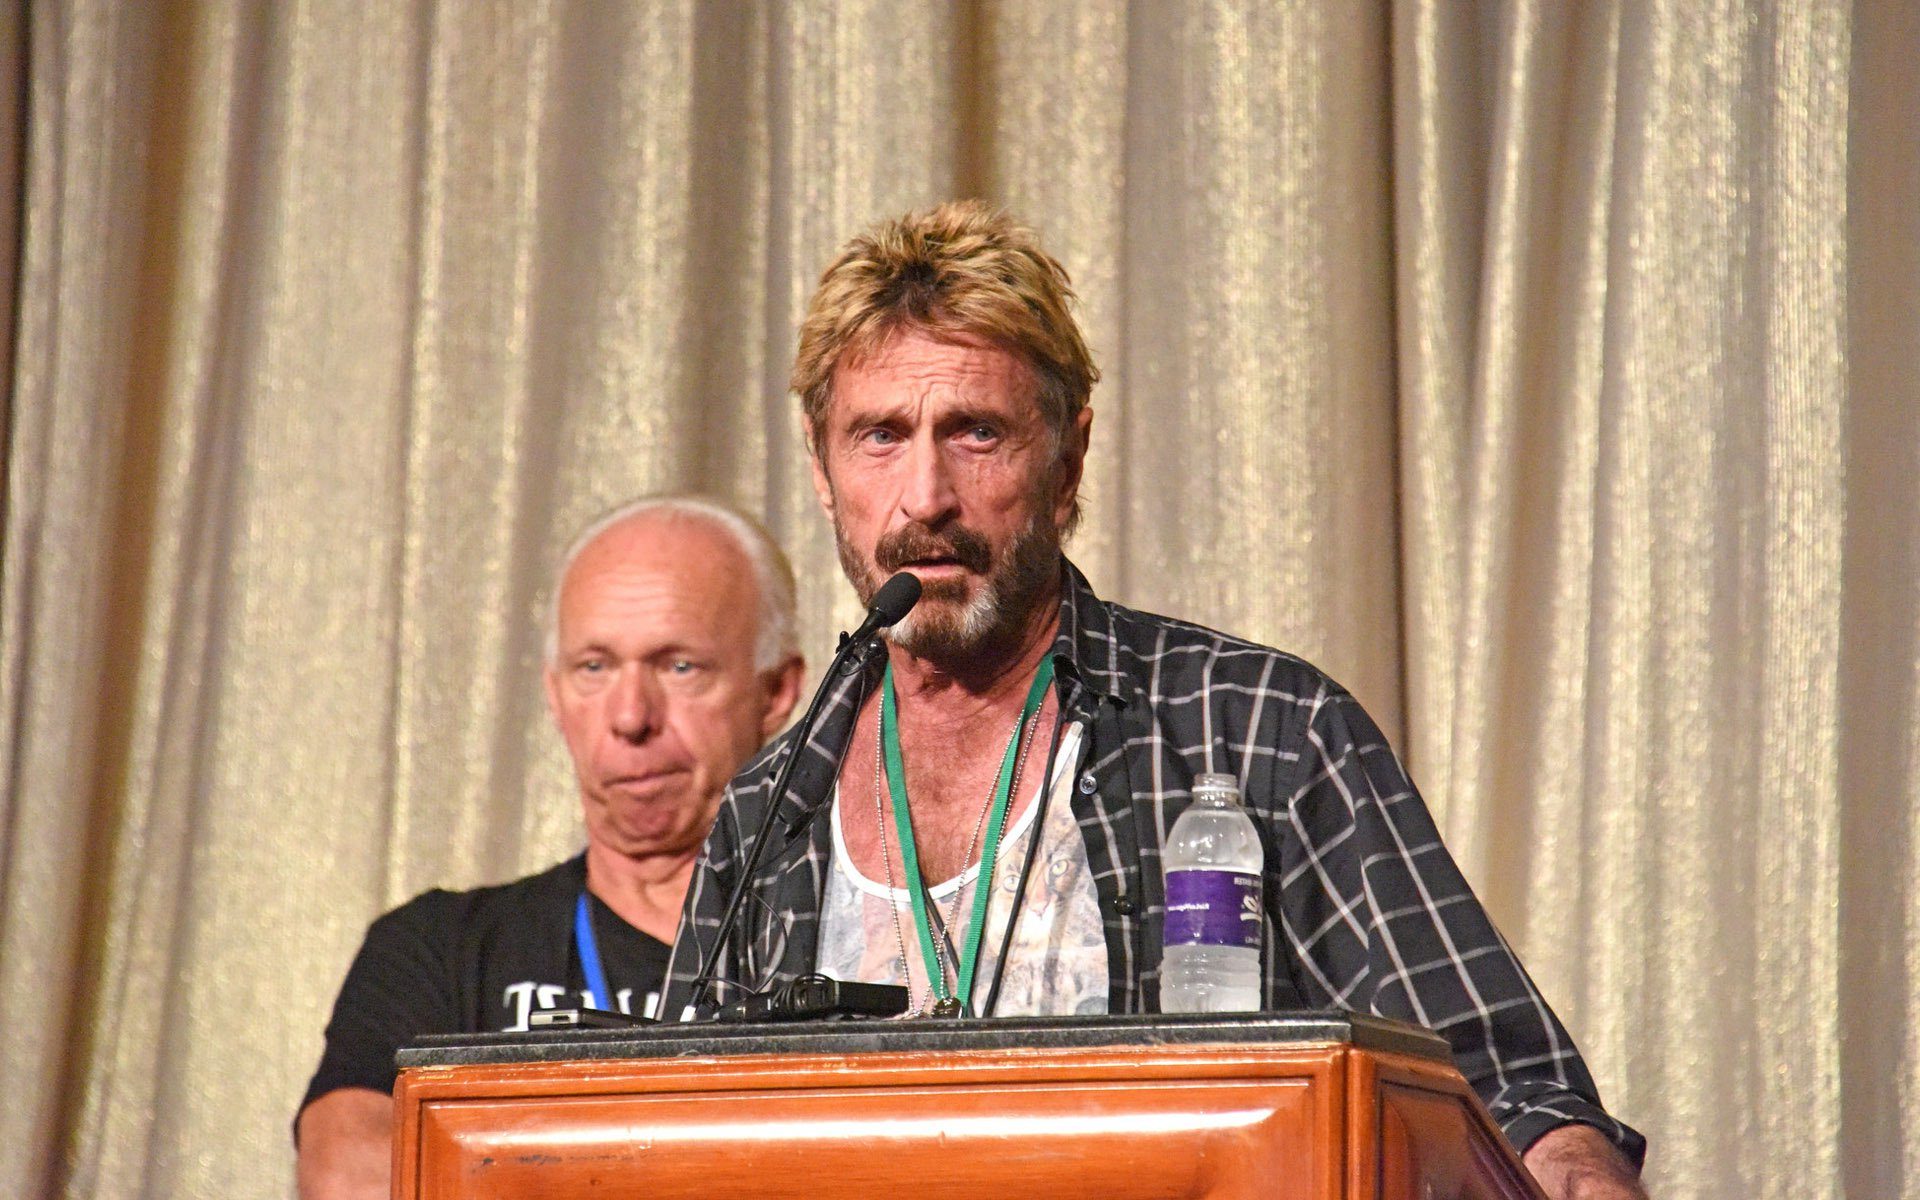 ‘No Hoax’: John McAfee to Launch ‘McAfee Redemption Unit’ Currency